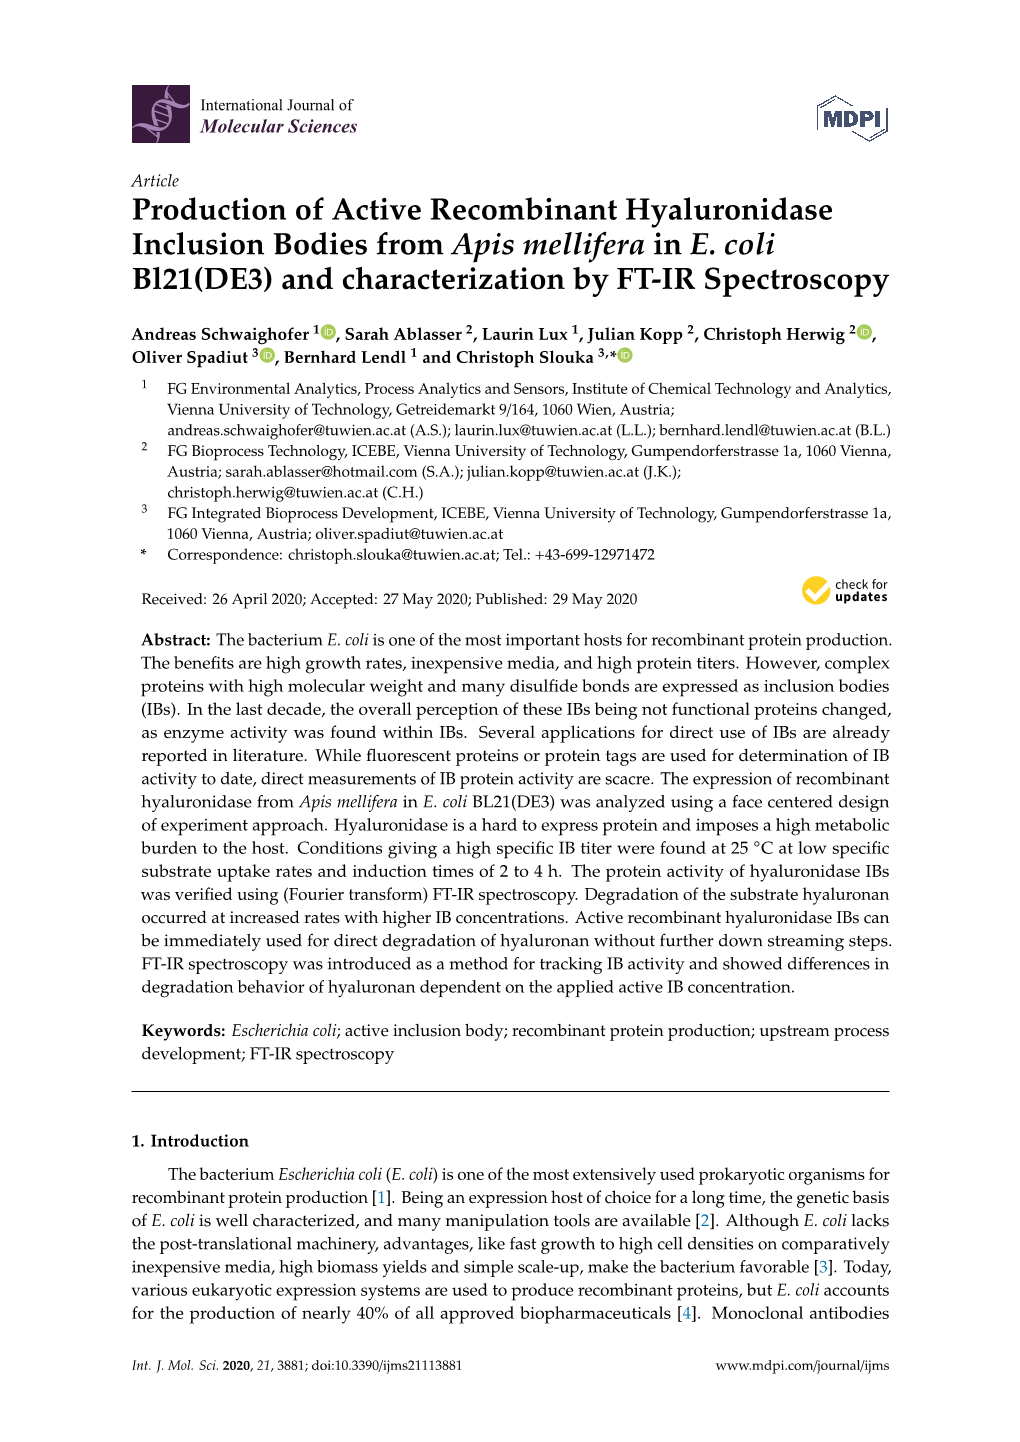 Production of Active Recombinant Hyaluronidase Inclusion Bodies from Apis Mellifera in E